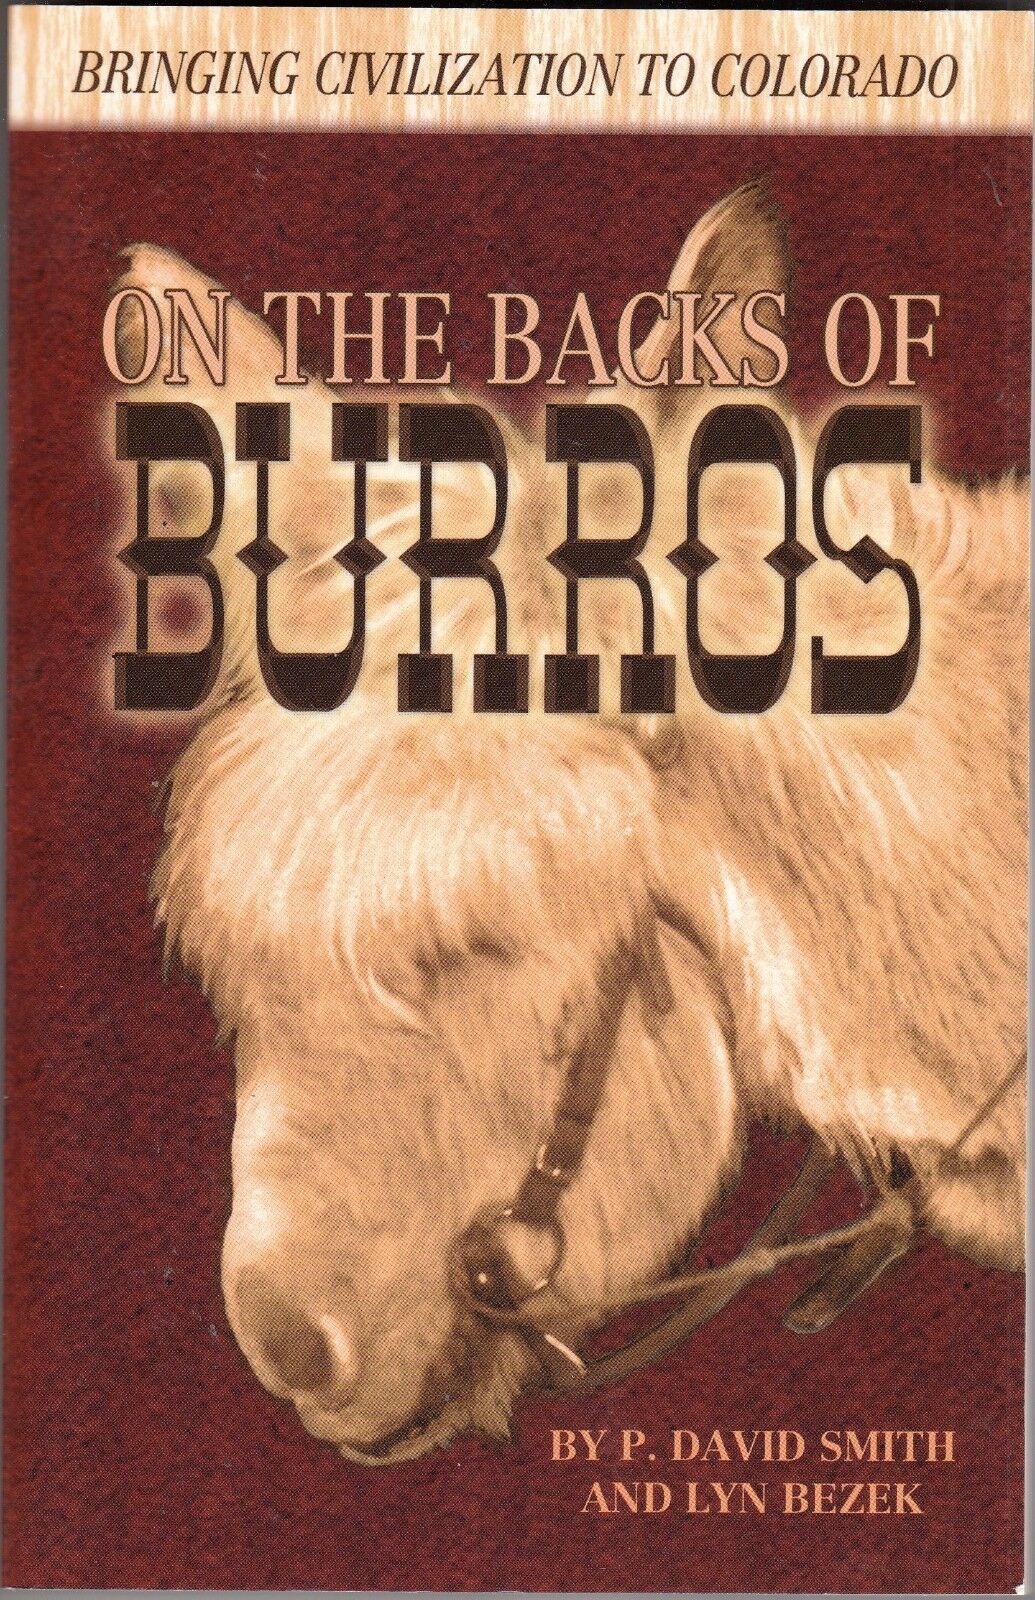 Primary image for ON THE BACKS OF BURROS (2010) P. David Smith & Lyn Bezek - Colorado History TPB